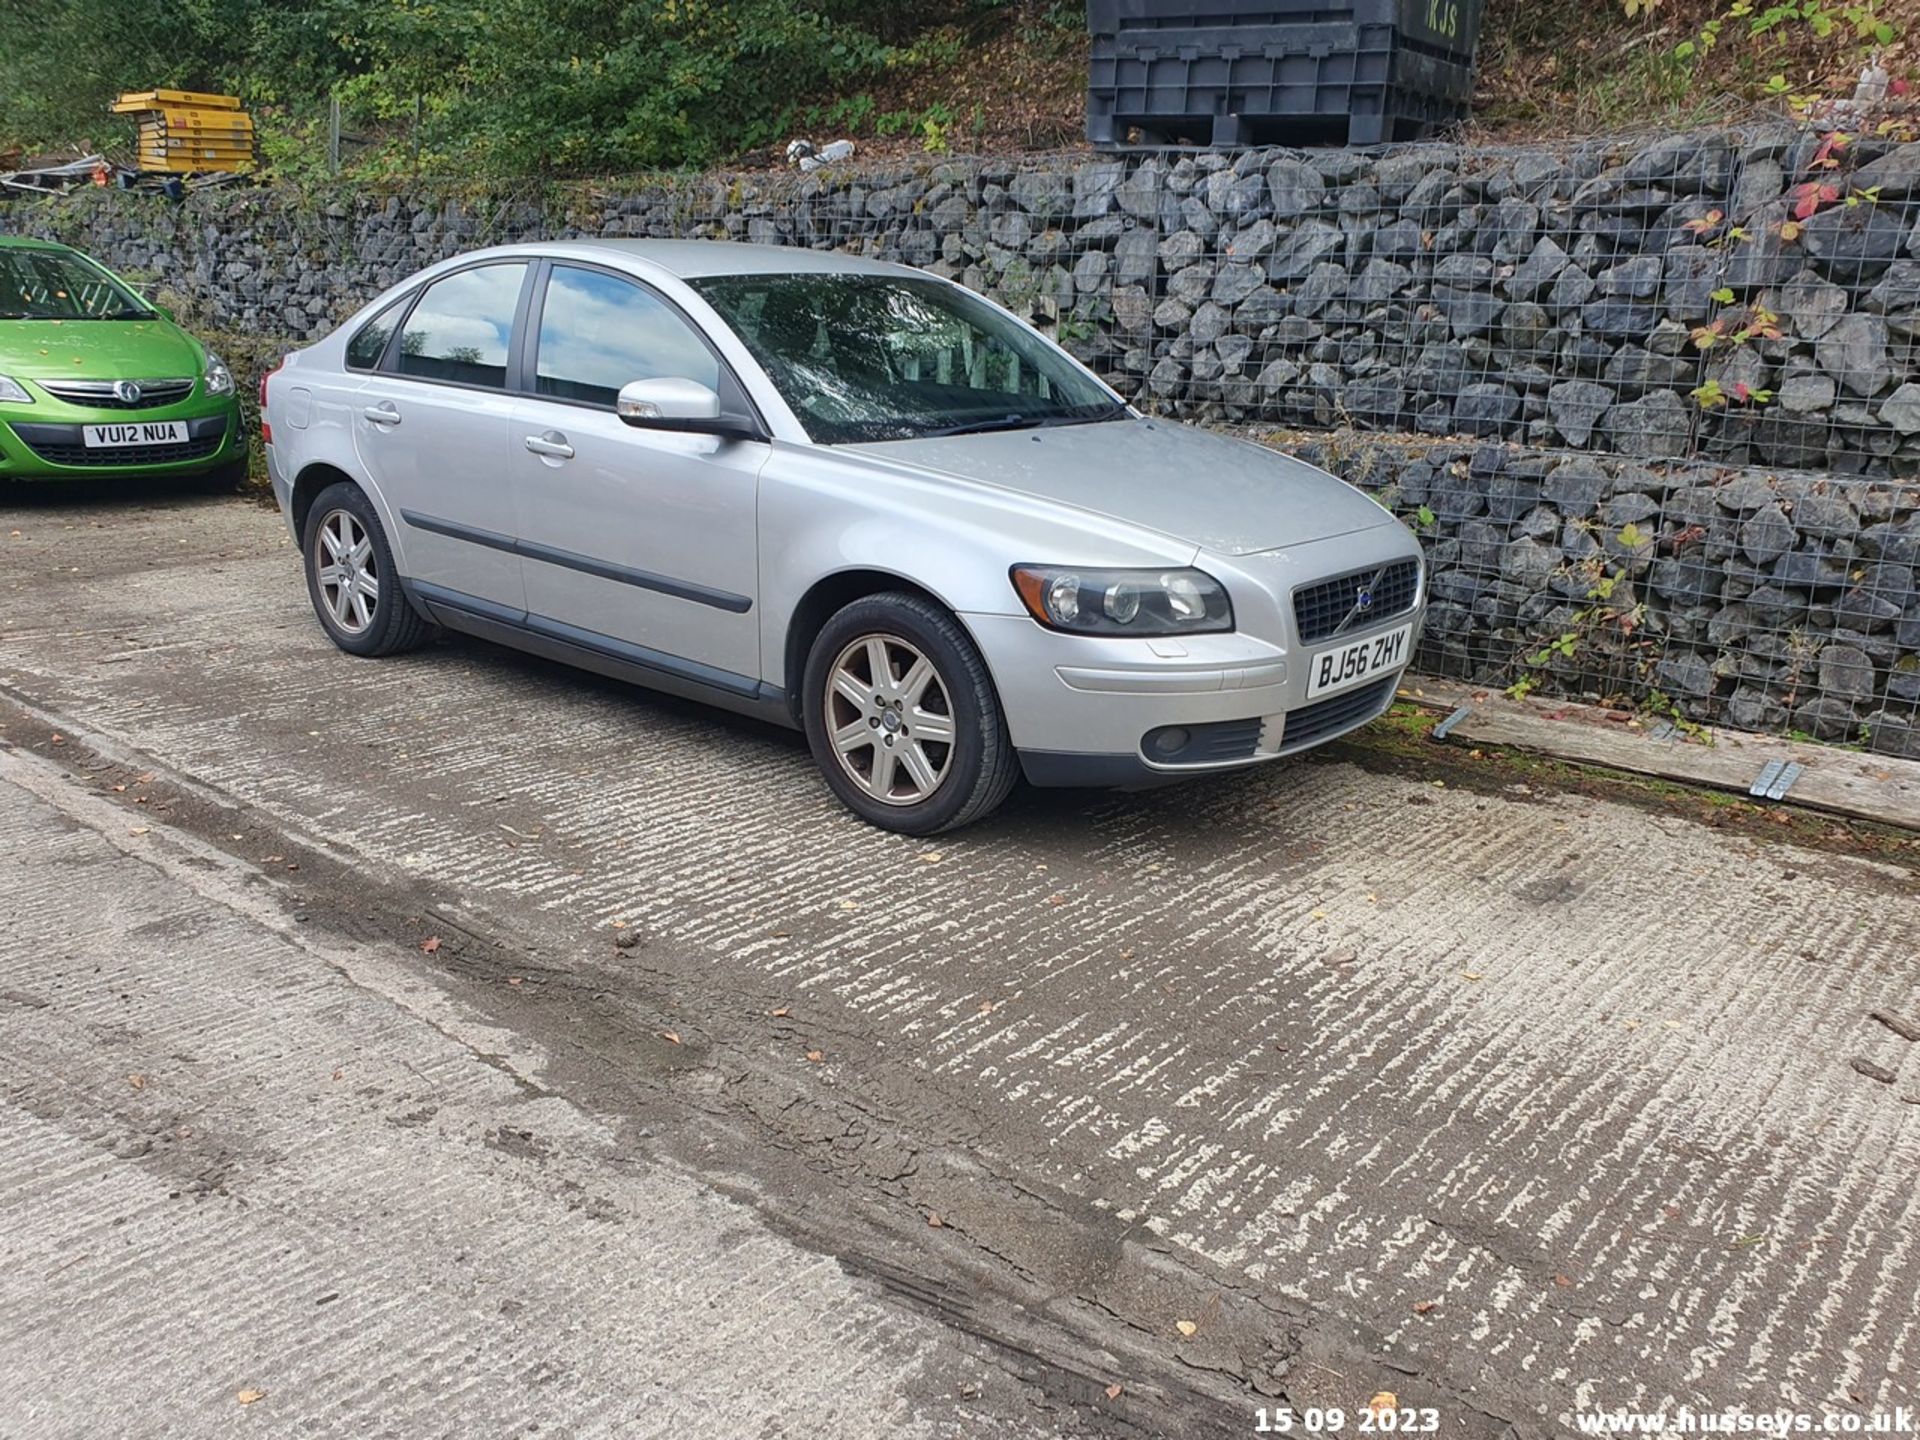 07/56 VOLVO S40 S - 1596cc 4dr Saloon (Silver, 161k) - Image 2 of 29